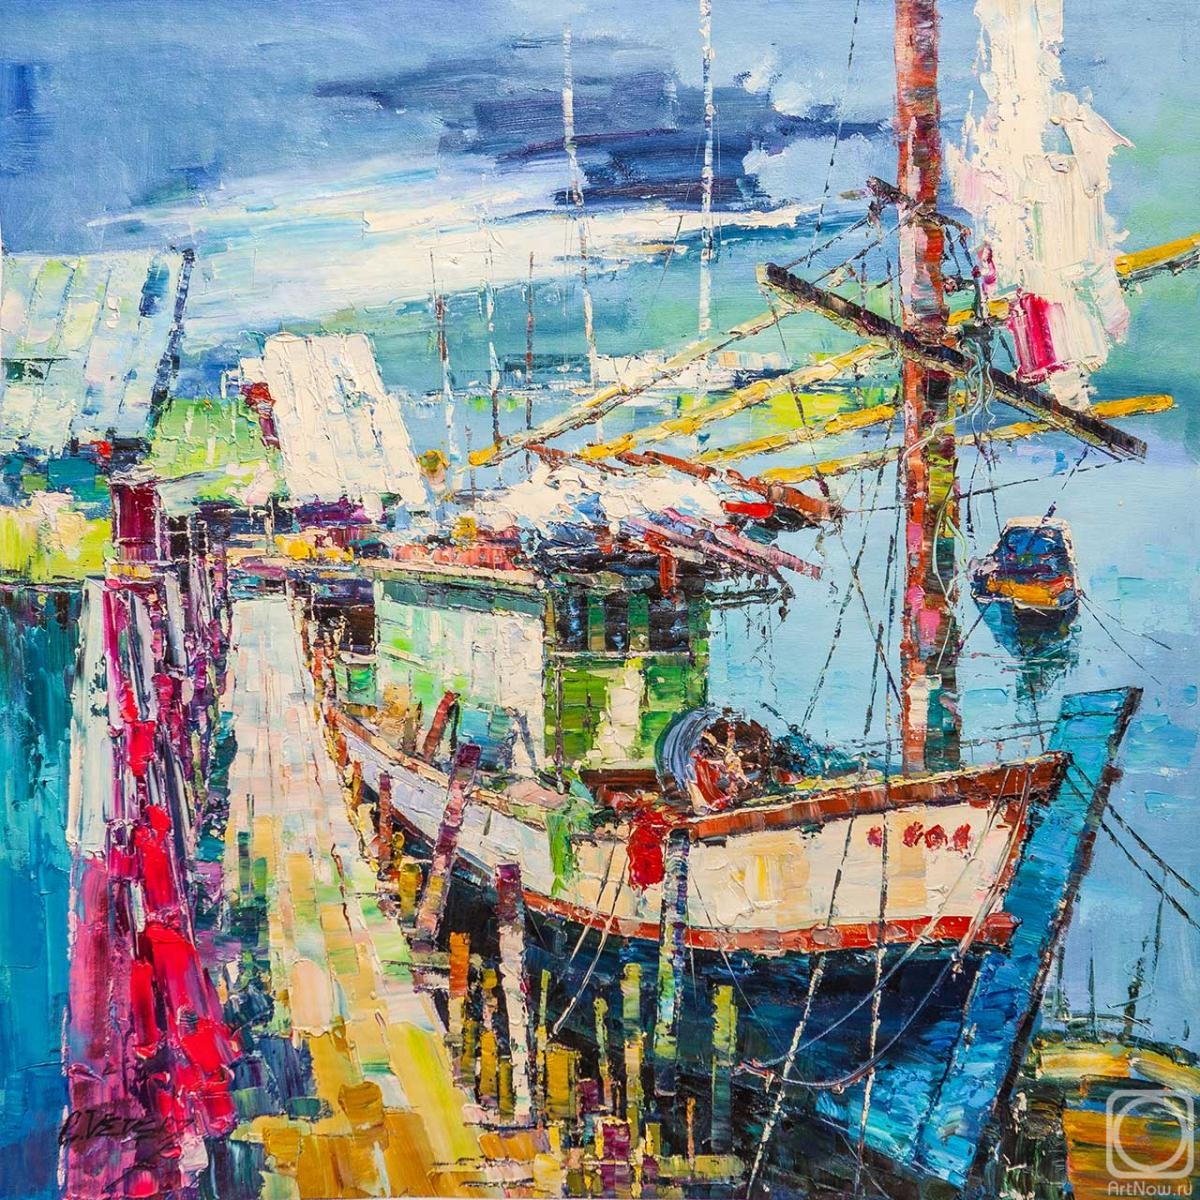 Vevers Christina. Fishing boat. In shades of azure